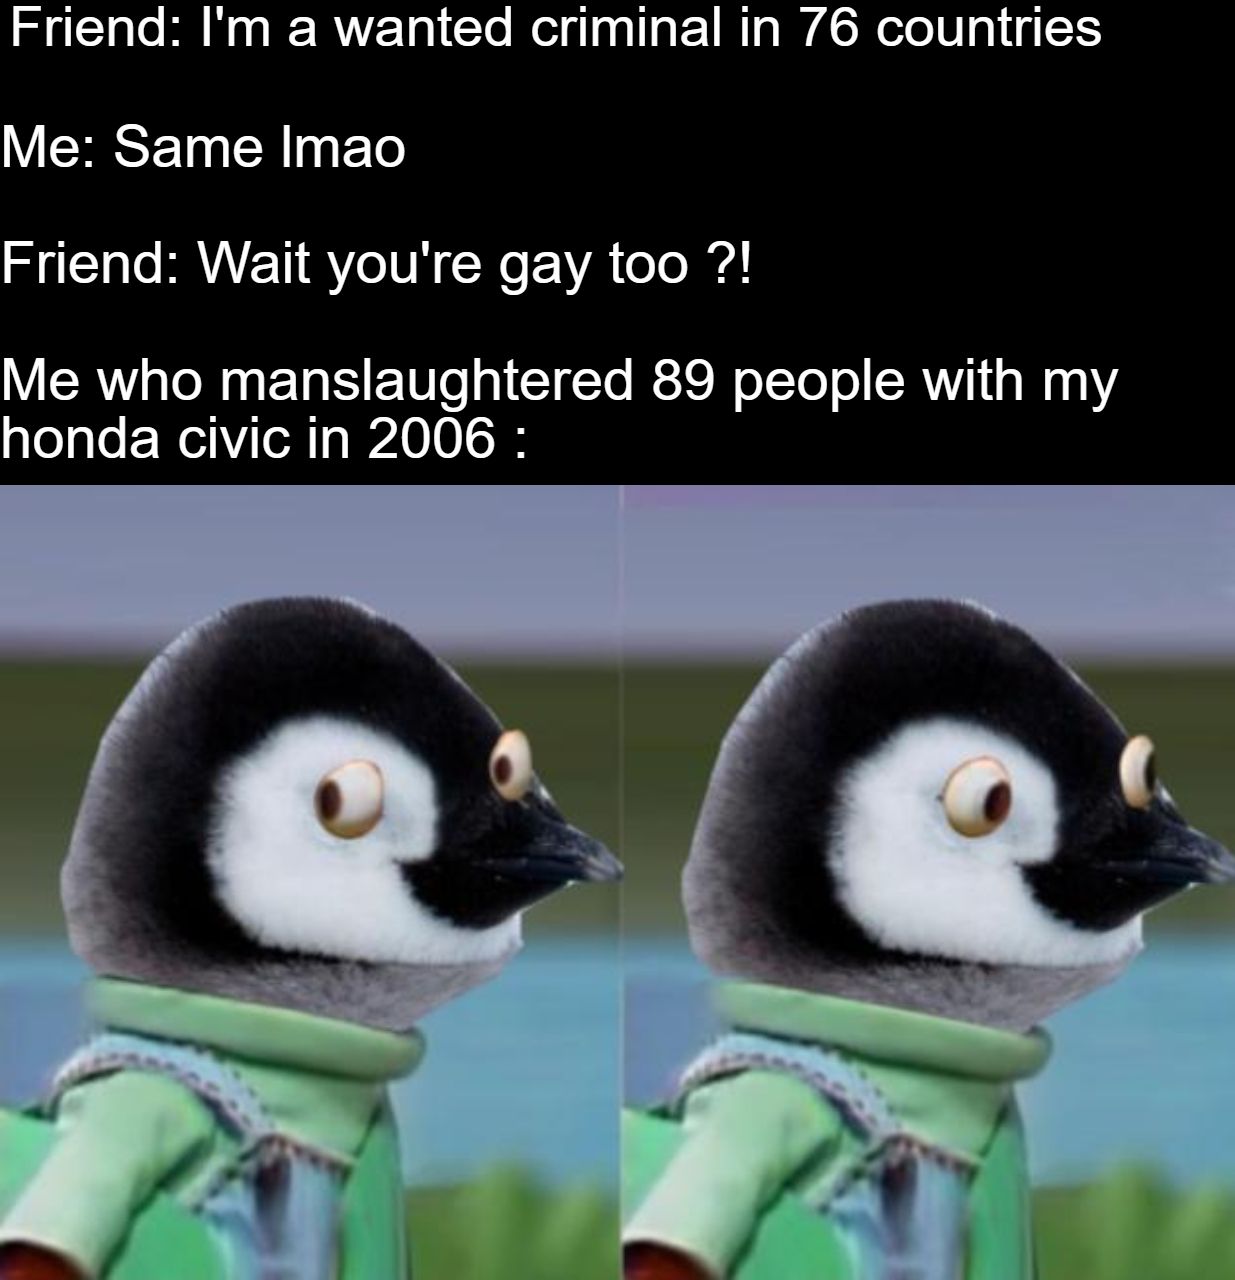 being gay is a crime in 76 countries